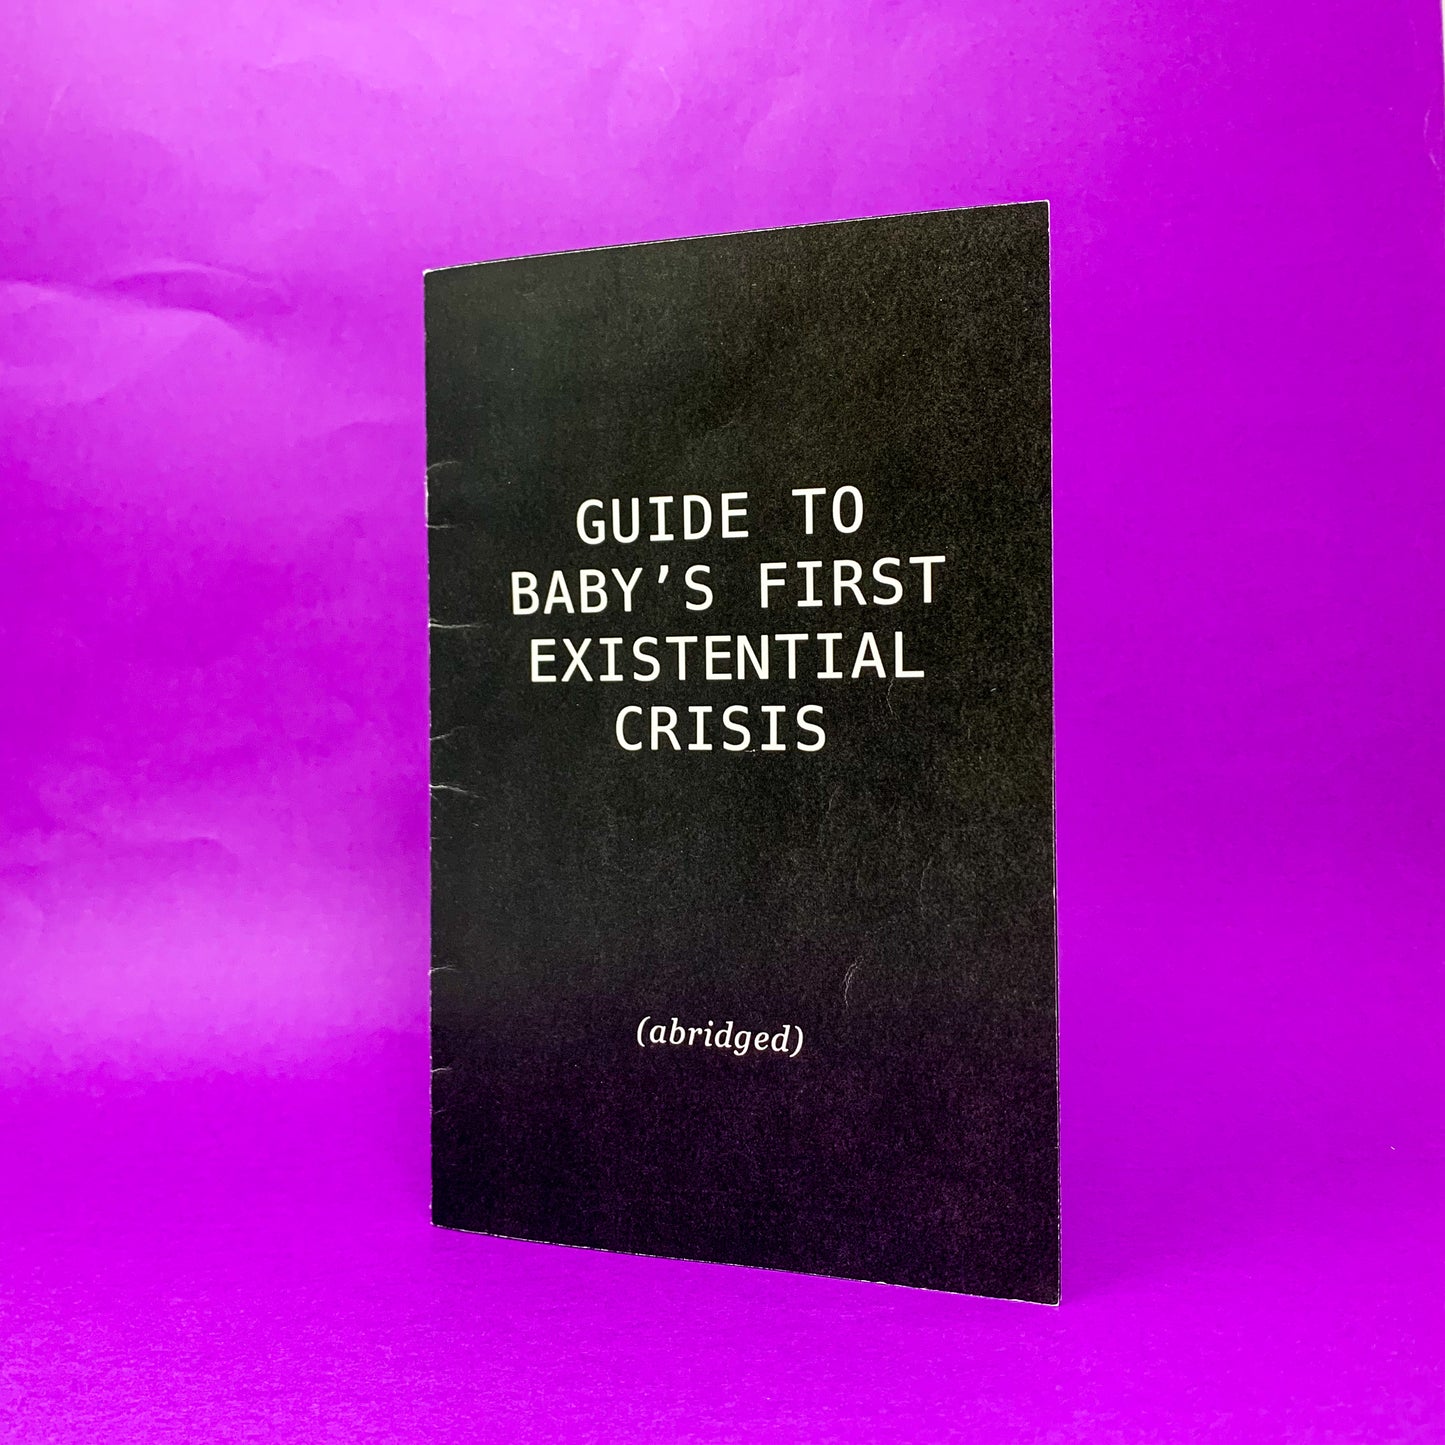 "Guide to Baby's First Existential Crisis" - the zine